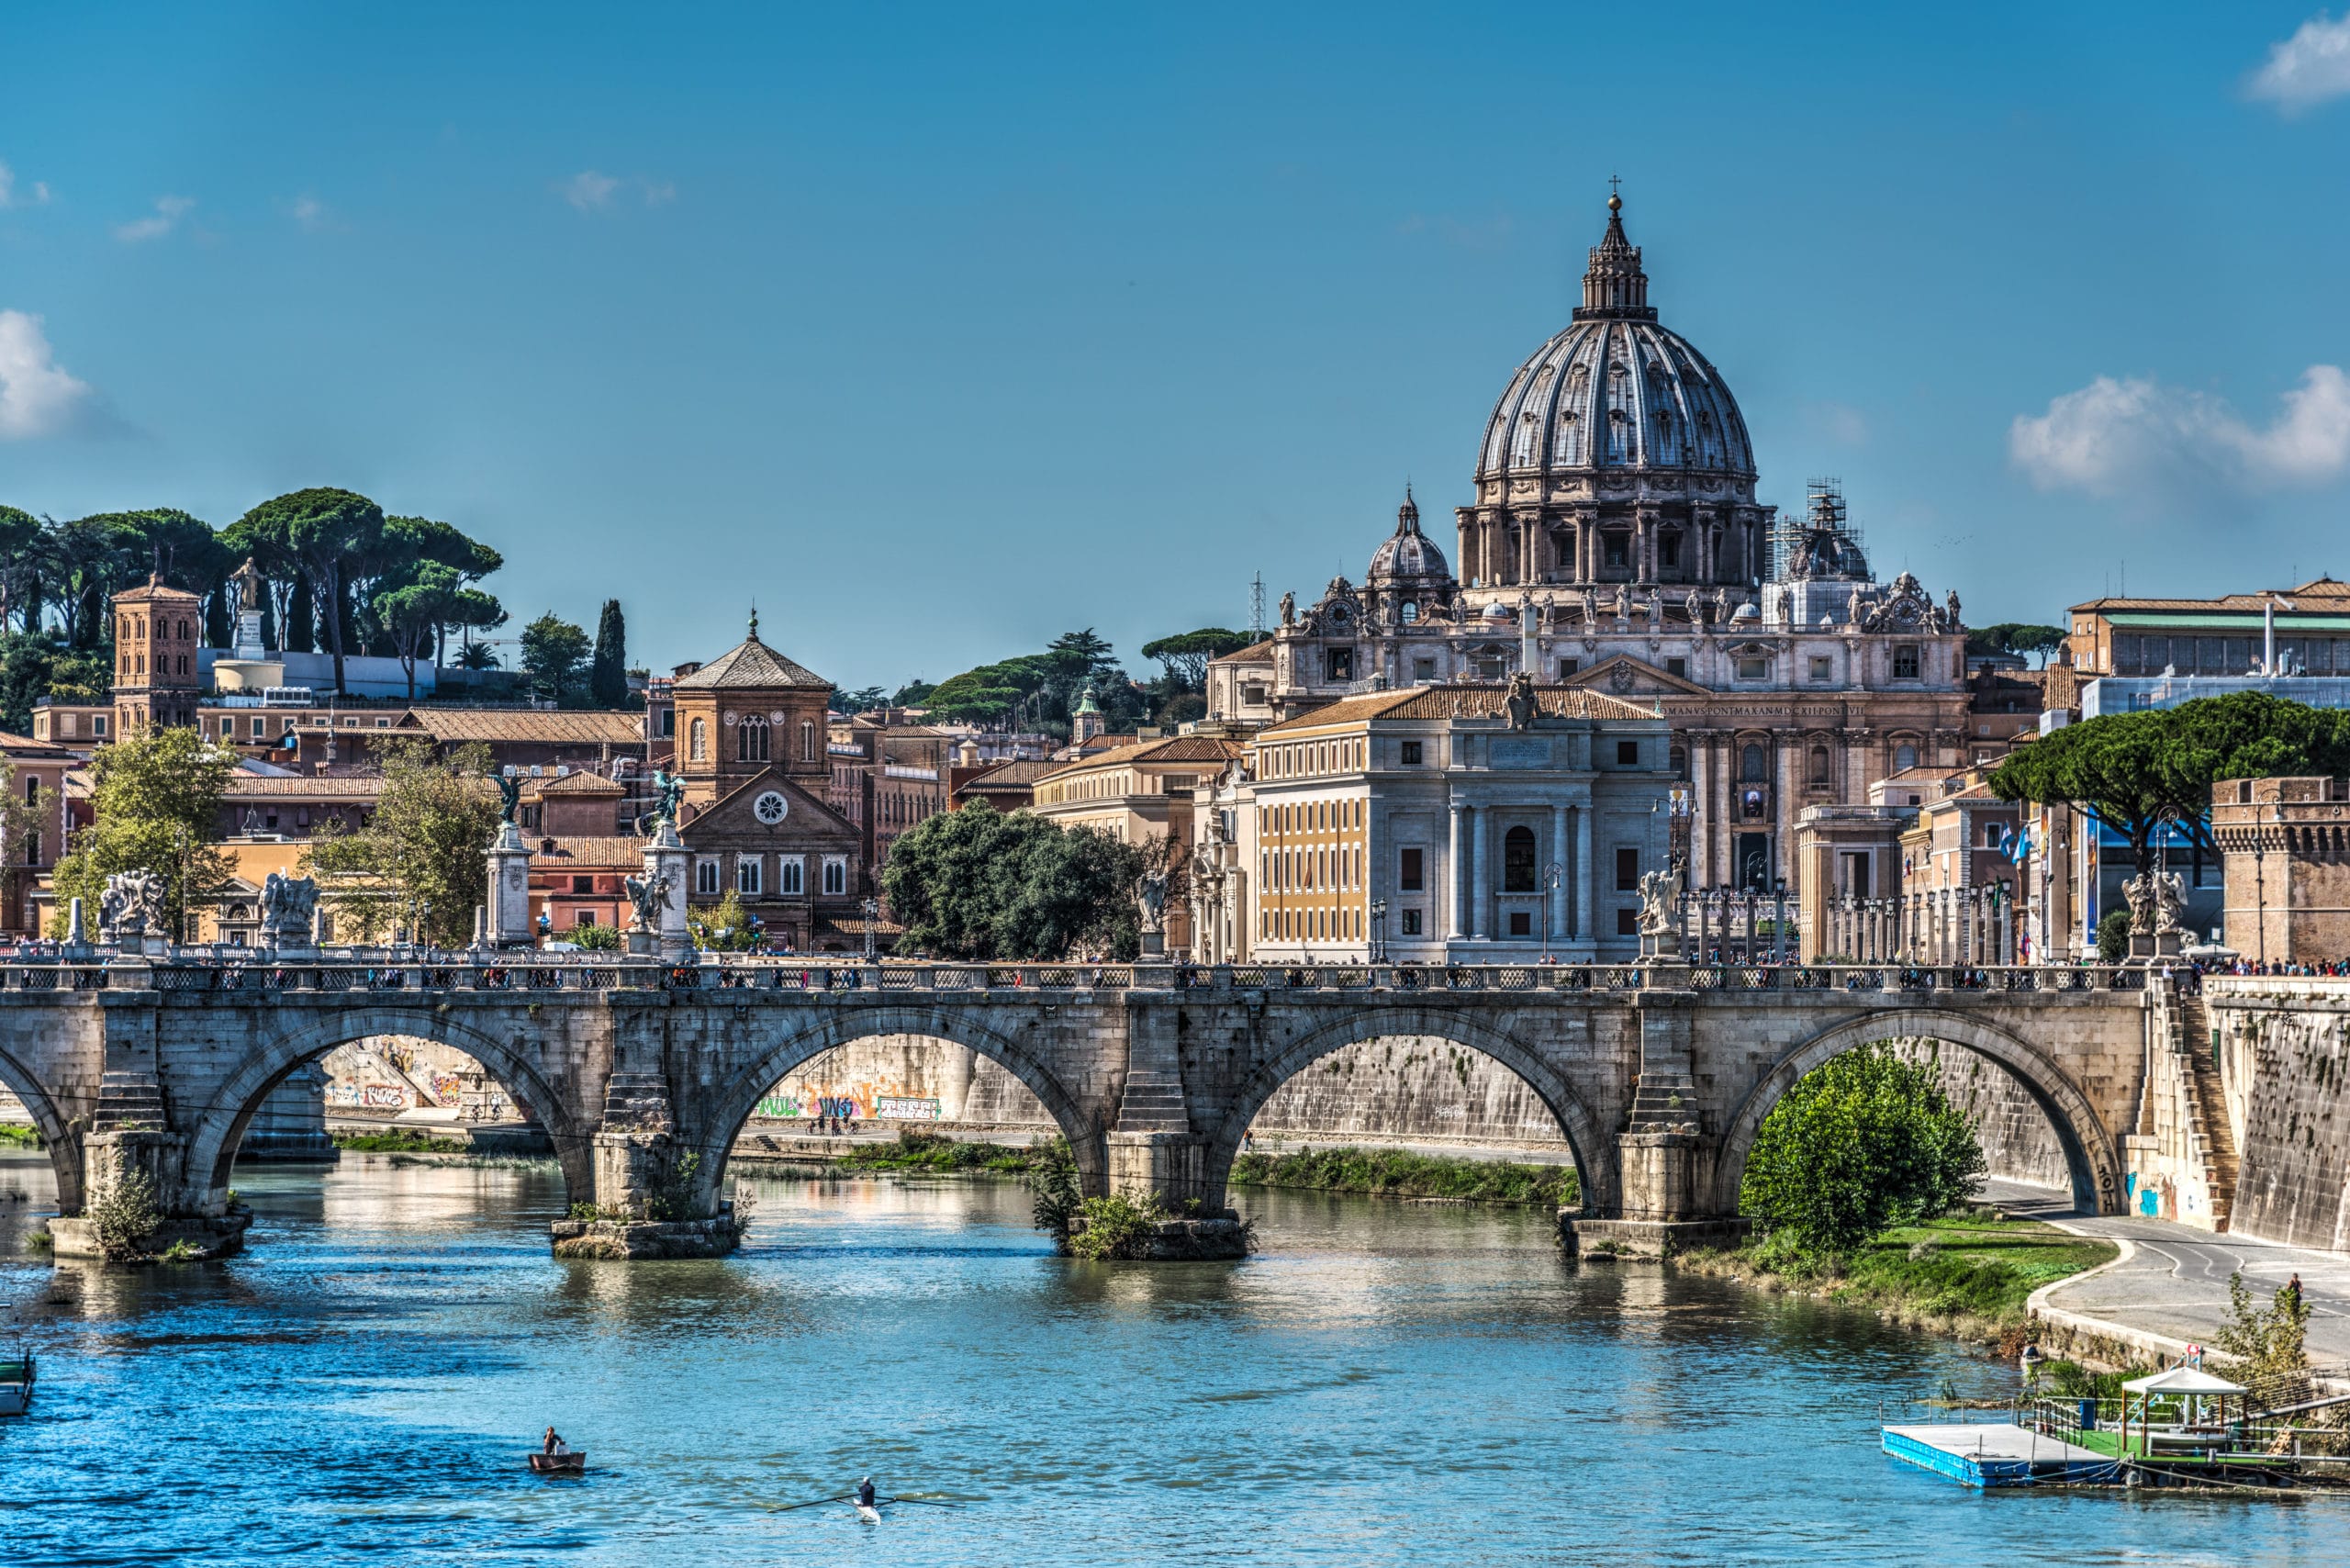 Saint Peter's dome seen from Tiber river